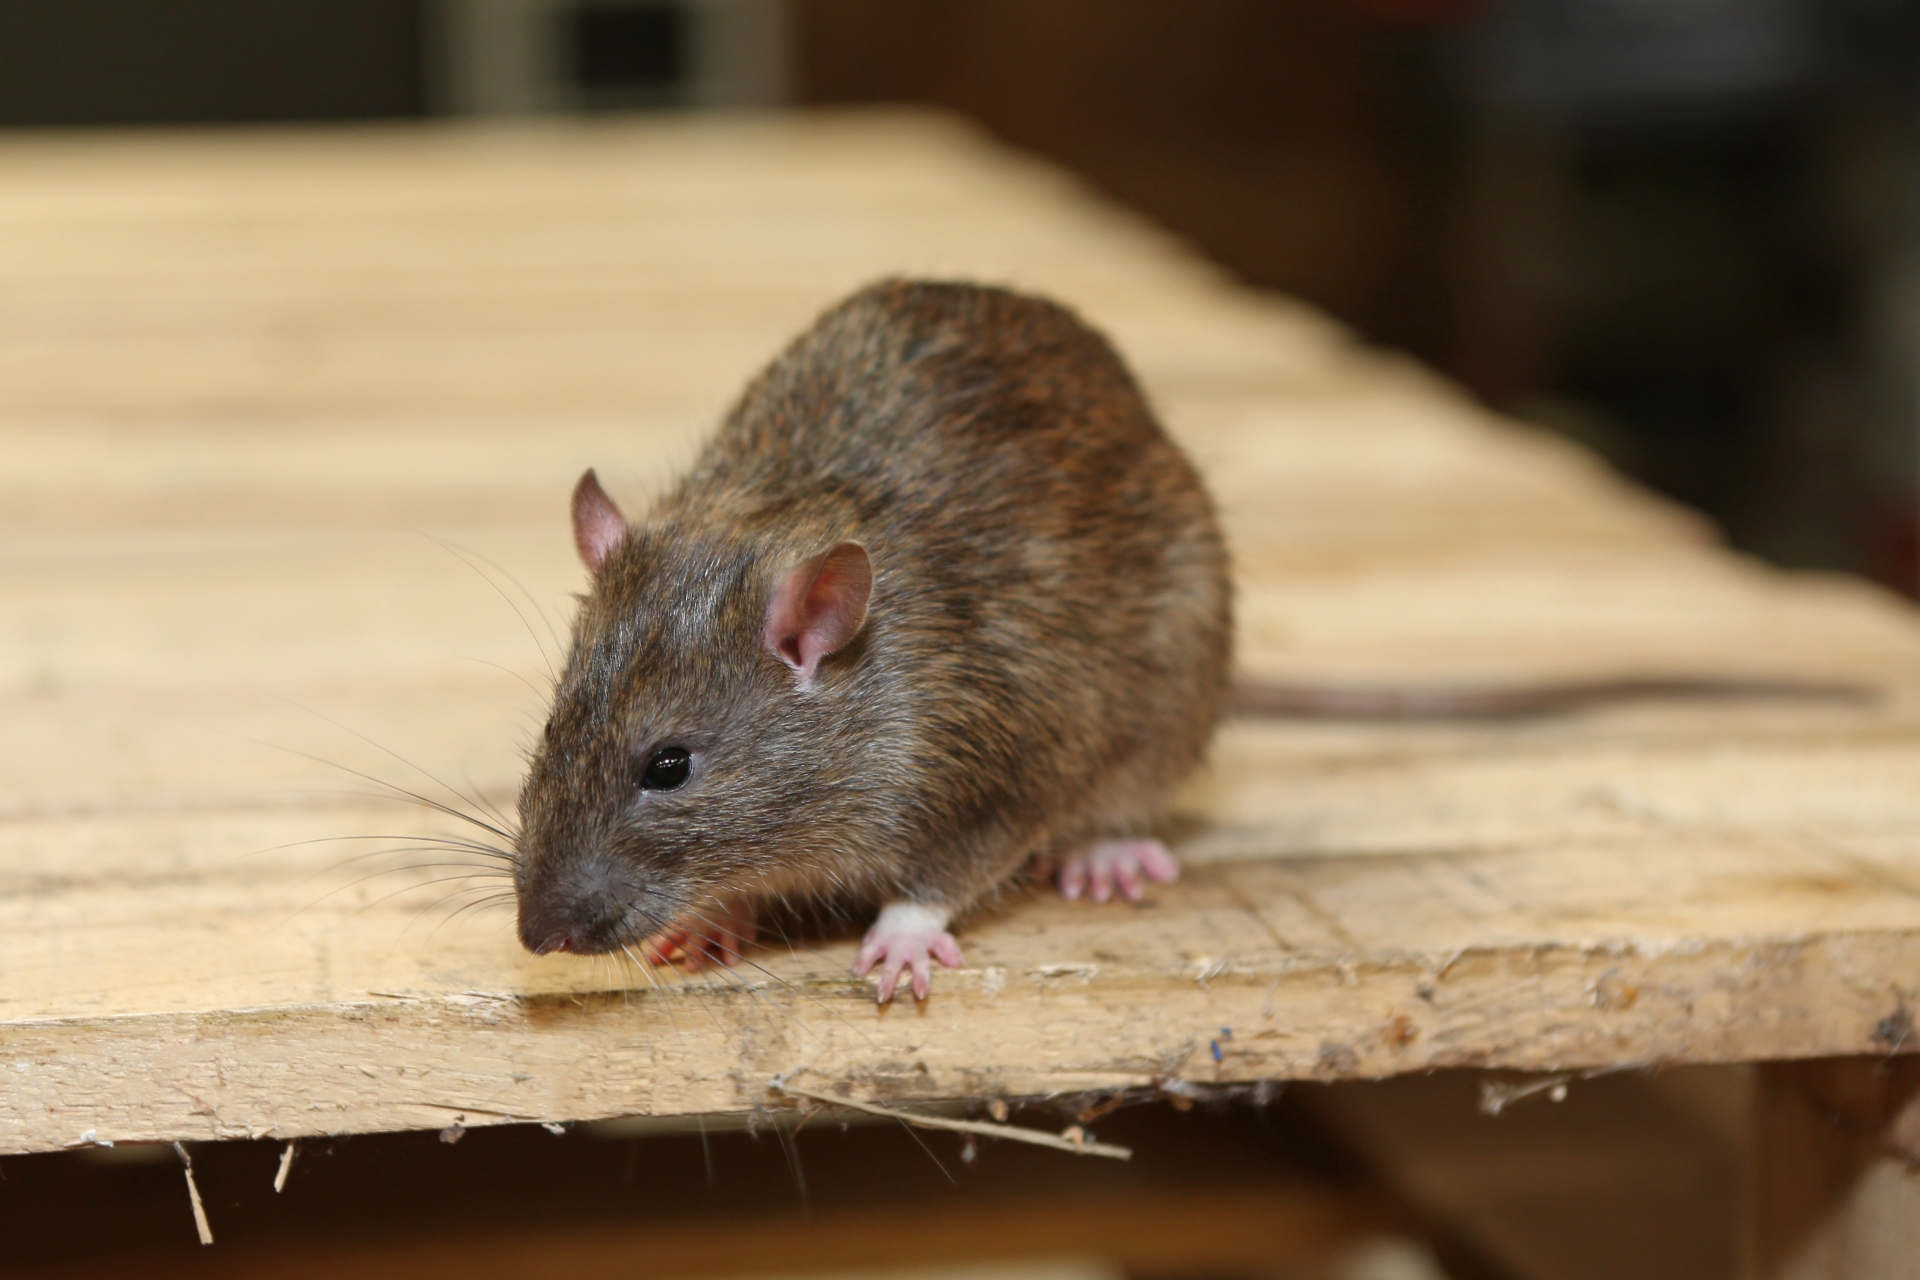 Rat extermination, Pest Control in Loughton, High Beach, IG10. Call Now 020 8166 9746